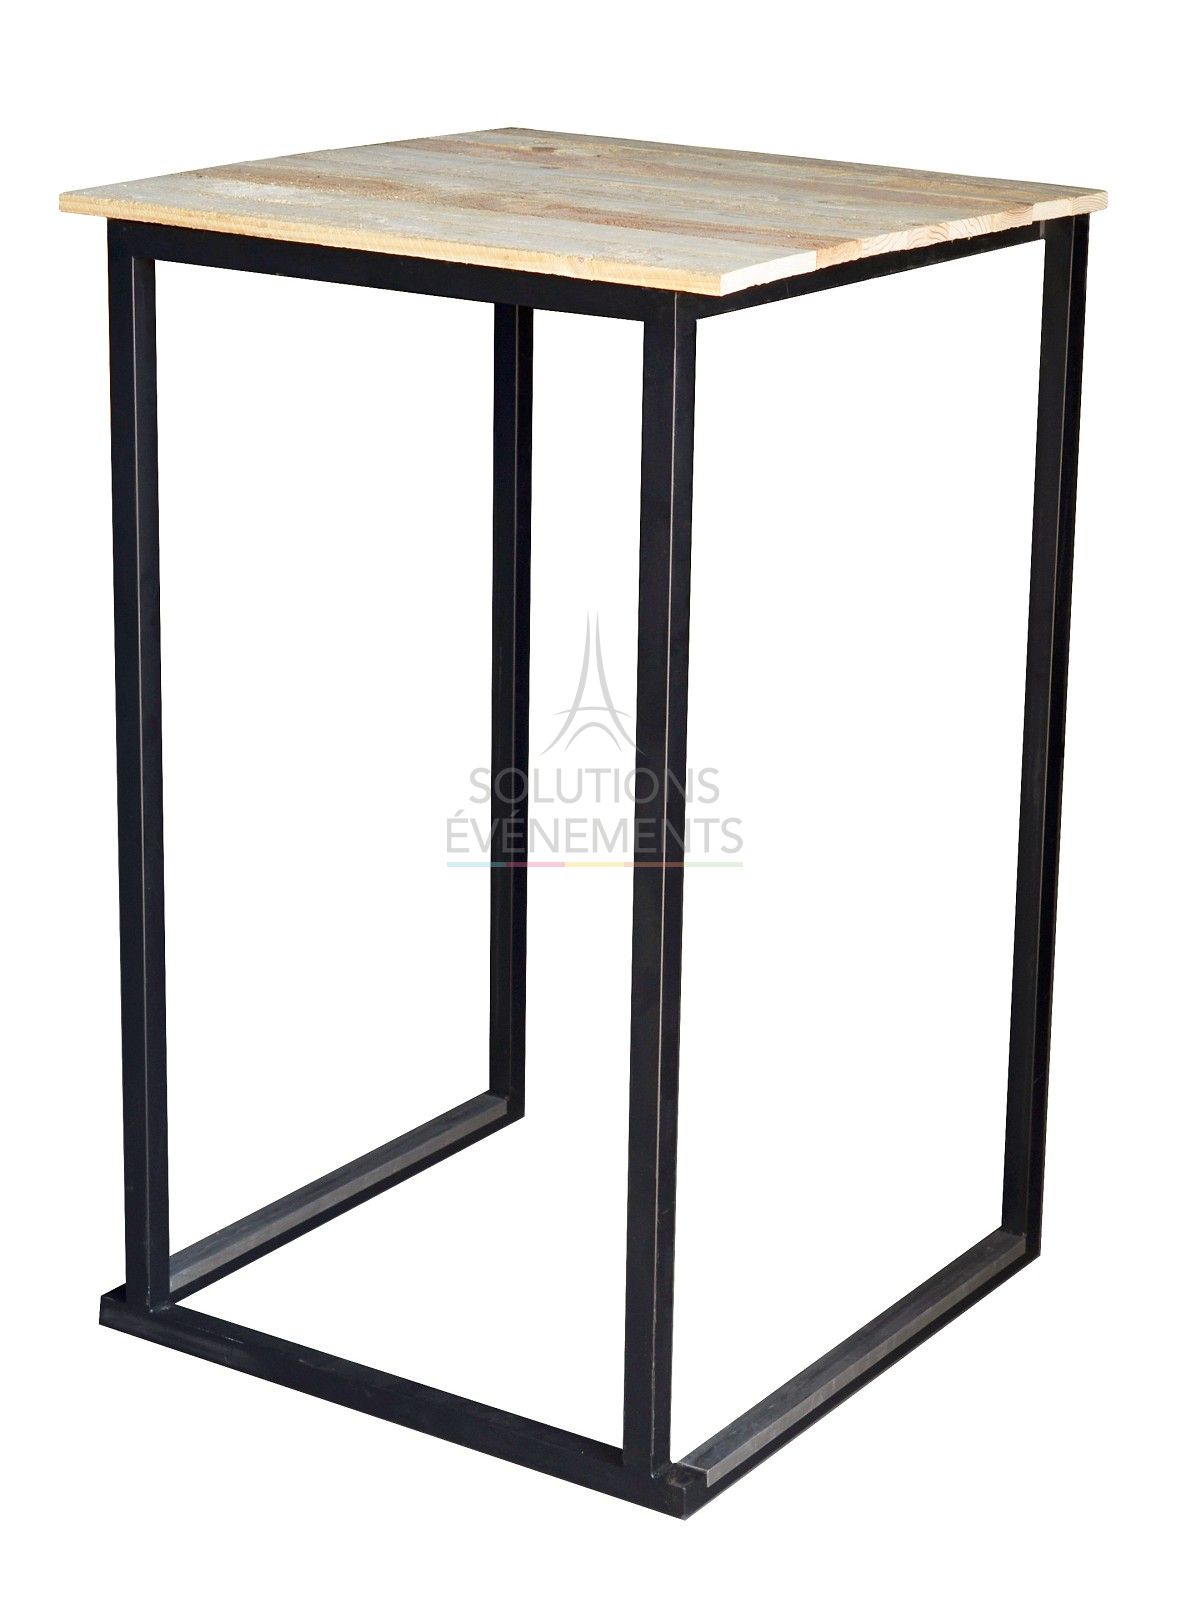 Kubo standing table in eco-responsible pallet wood